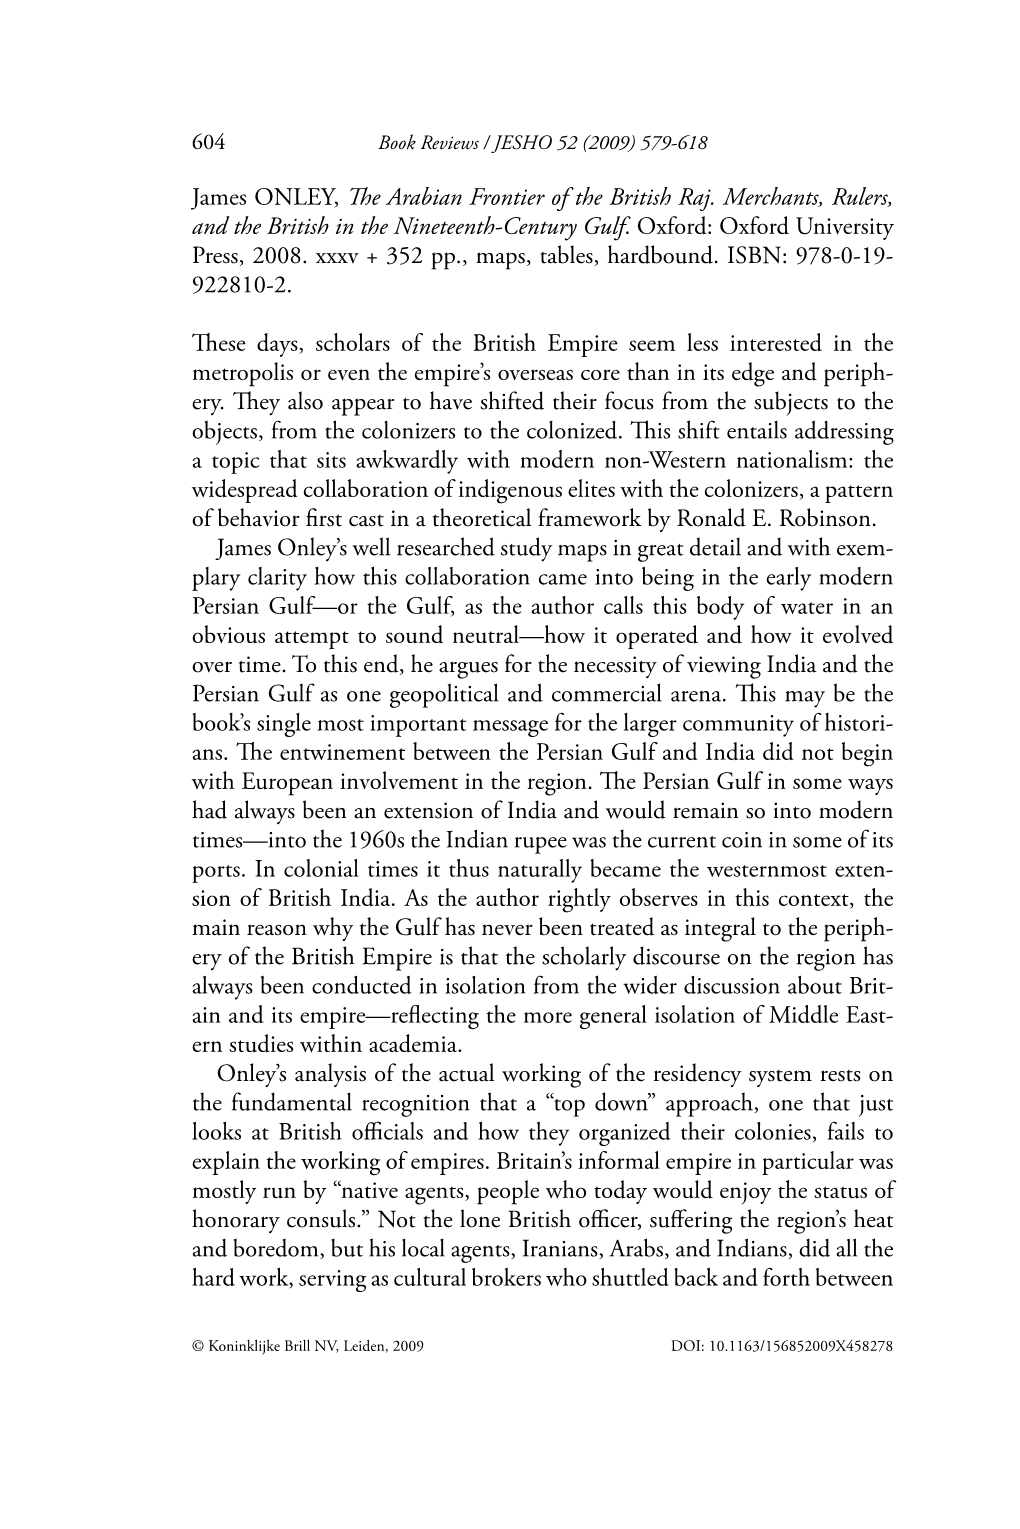 James ONLEY, the Arabian Frontier of the British Raj. Merchants, Rulers, and the British in the Nineteenth-Century Gulf. Oxford